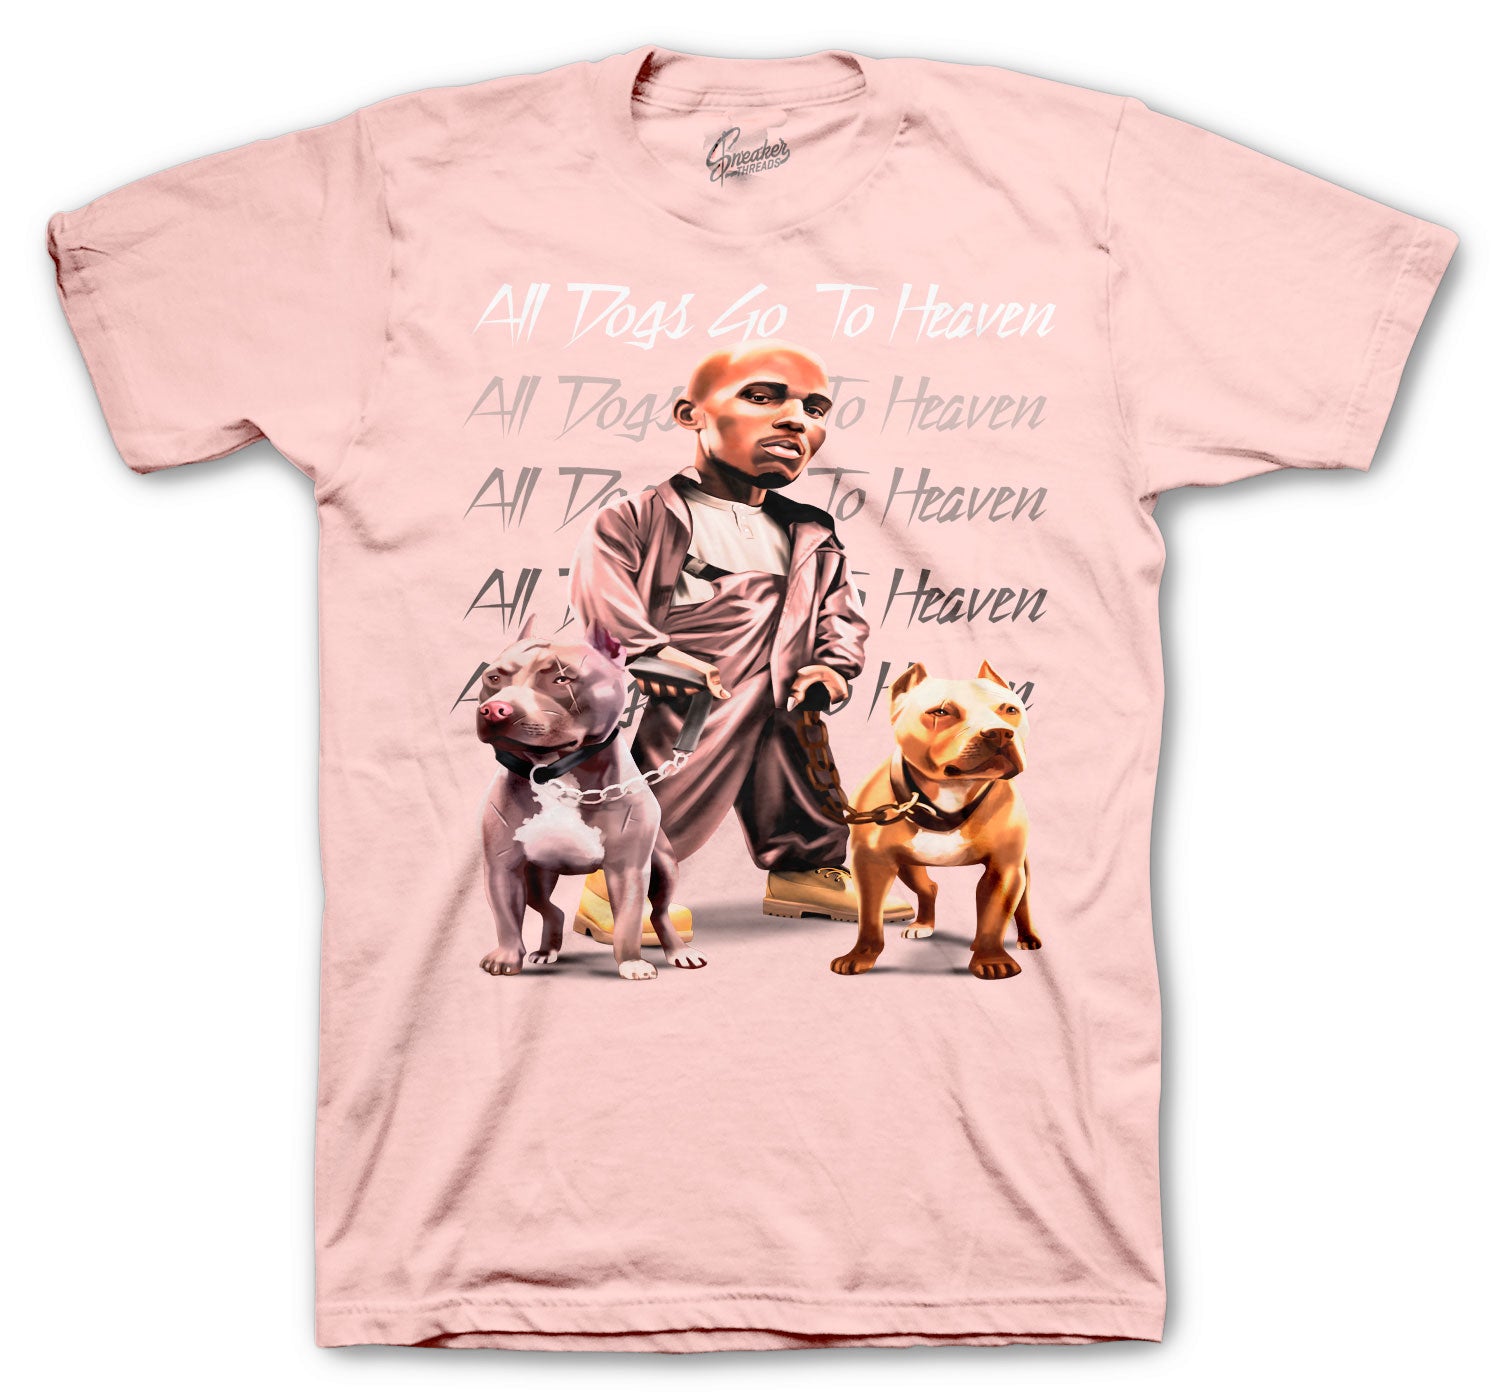 Retro 6 Gold hoops Shirt - All Dogs - Light Pink